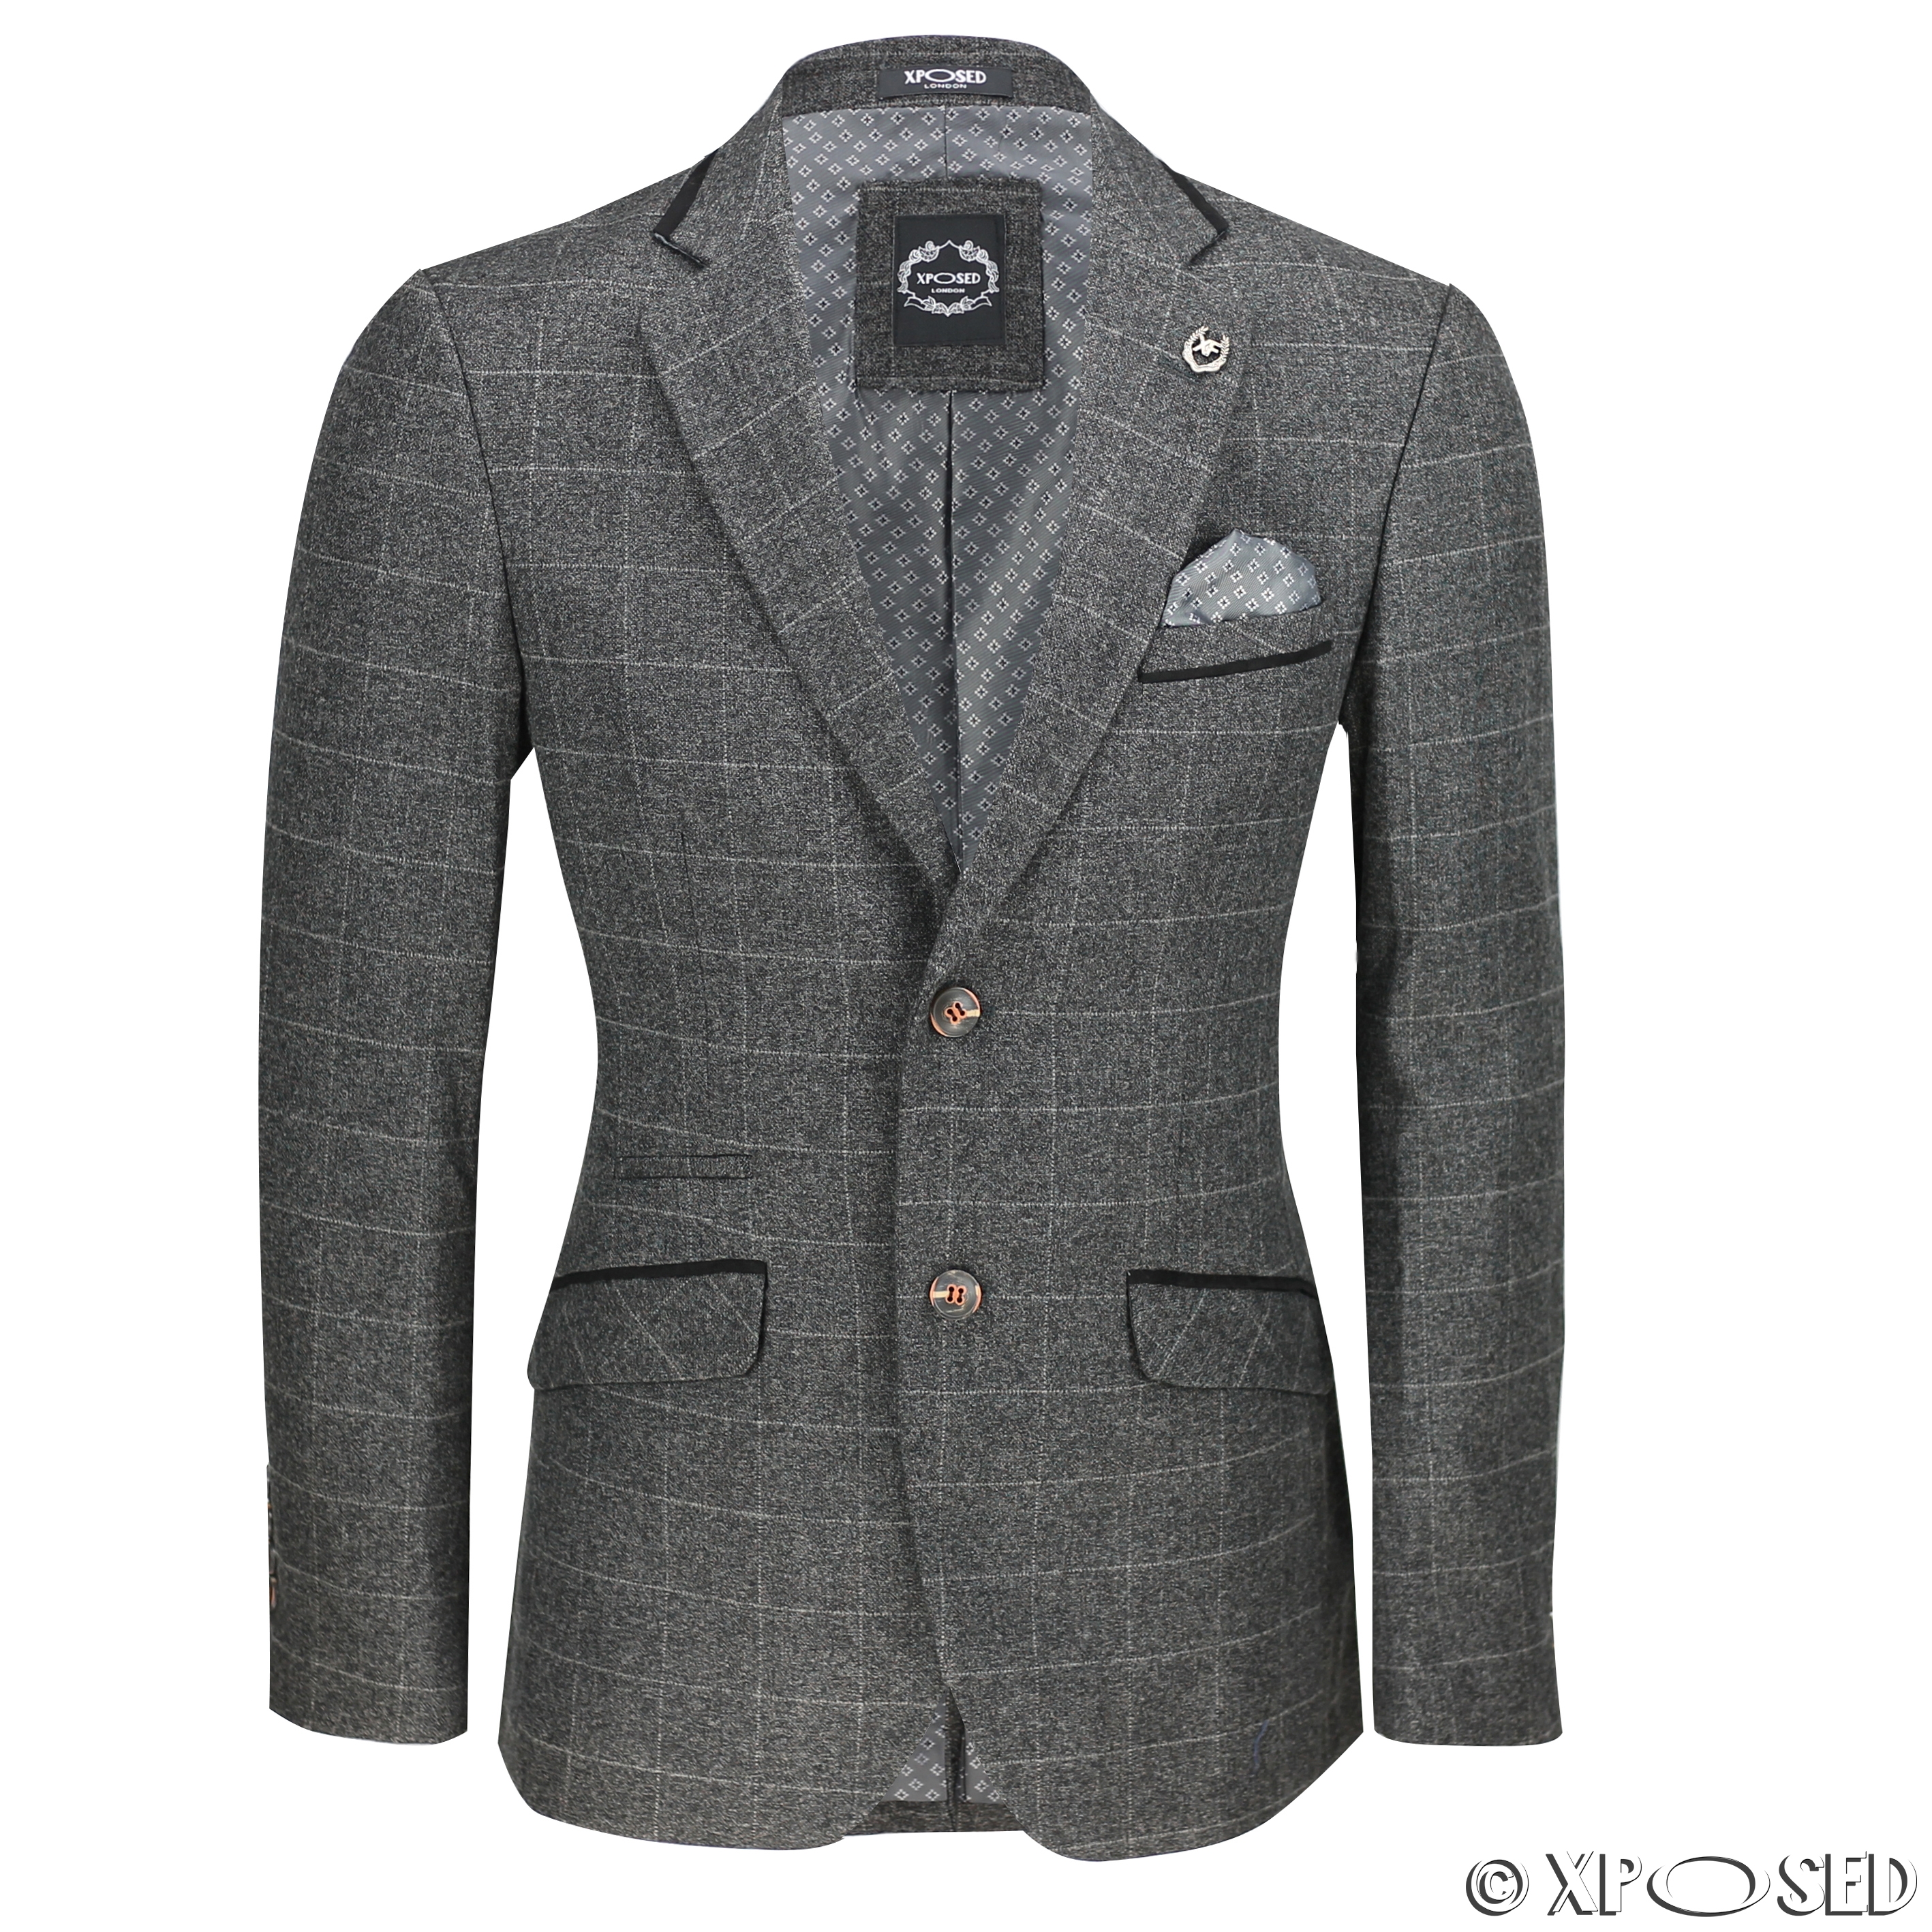 New Mens Grey Tweed Check 3 Piece Suit Sold Separately Blazer Trouser Waistcoat 